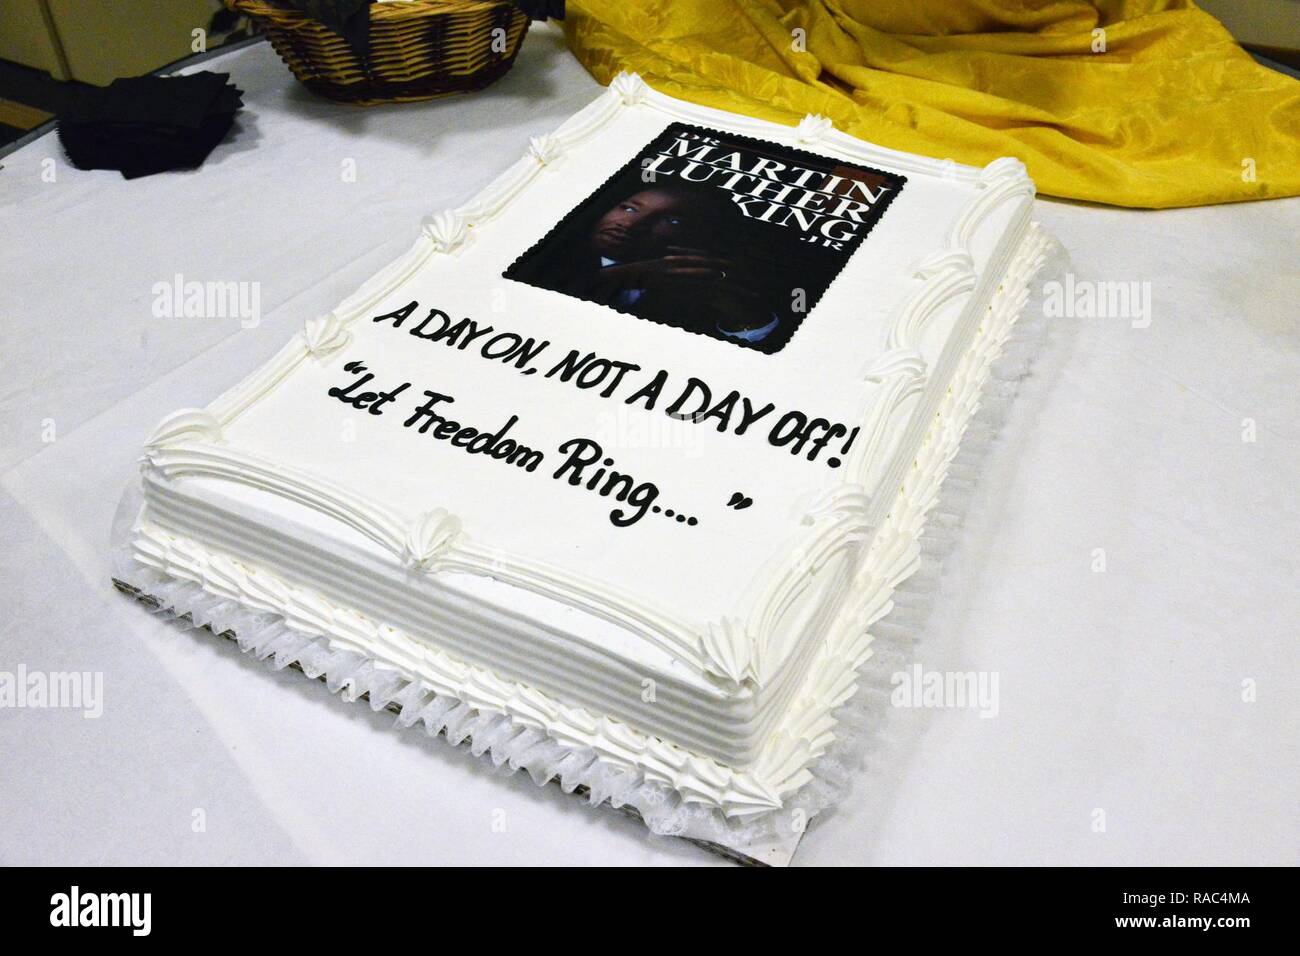 Cake for Martin Luther King, Jr. Day during Vicenza Military Community’s 2017 Observance Ceremony at Caserma Ederle, Vicenza, Italy, Jan. 10, 2017. Stock Photo